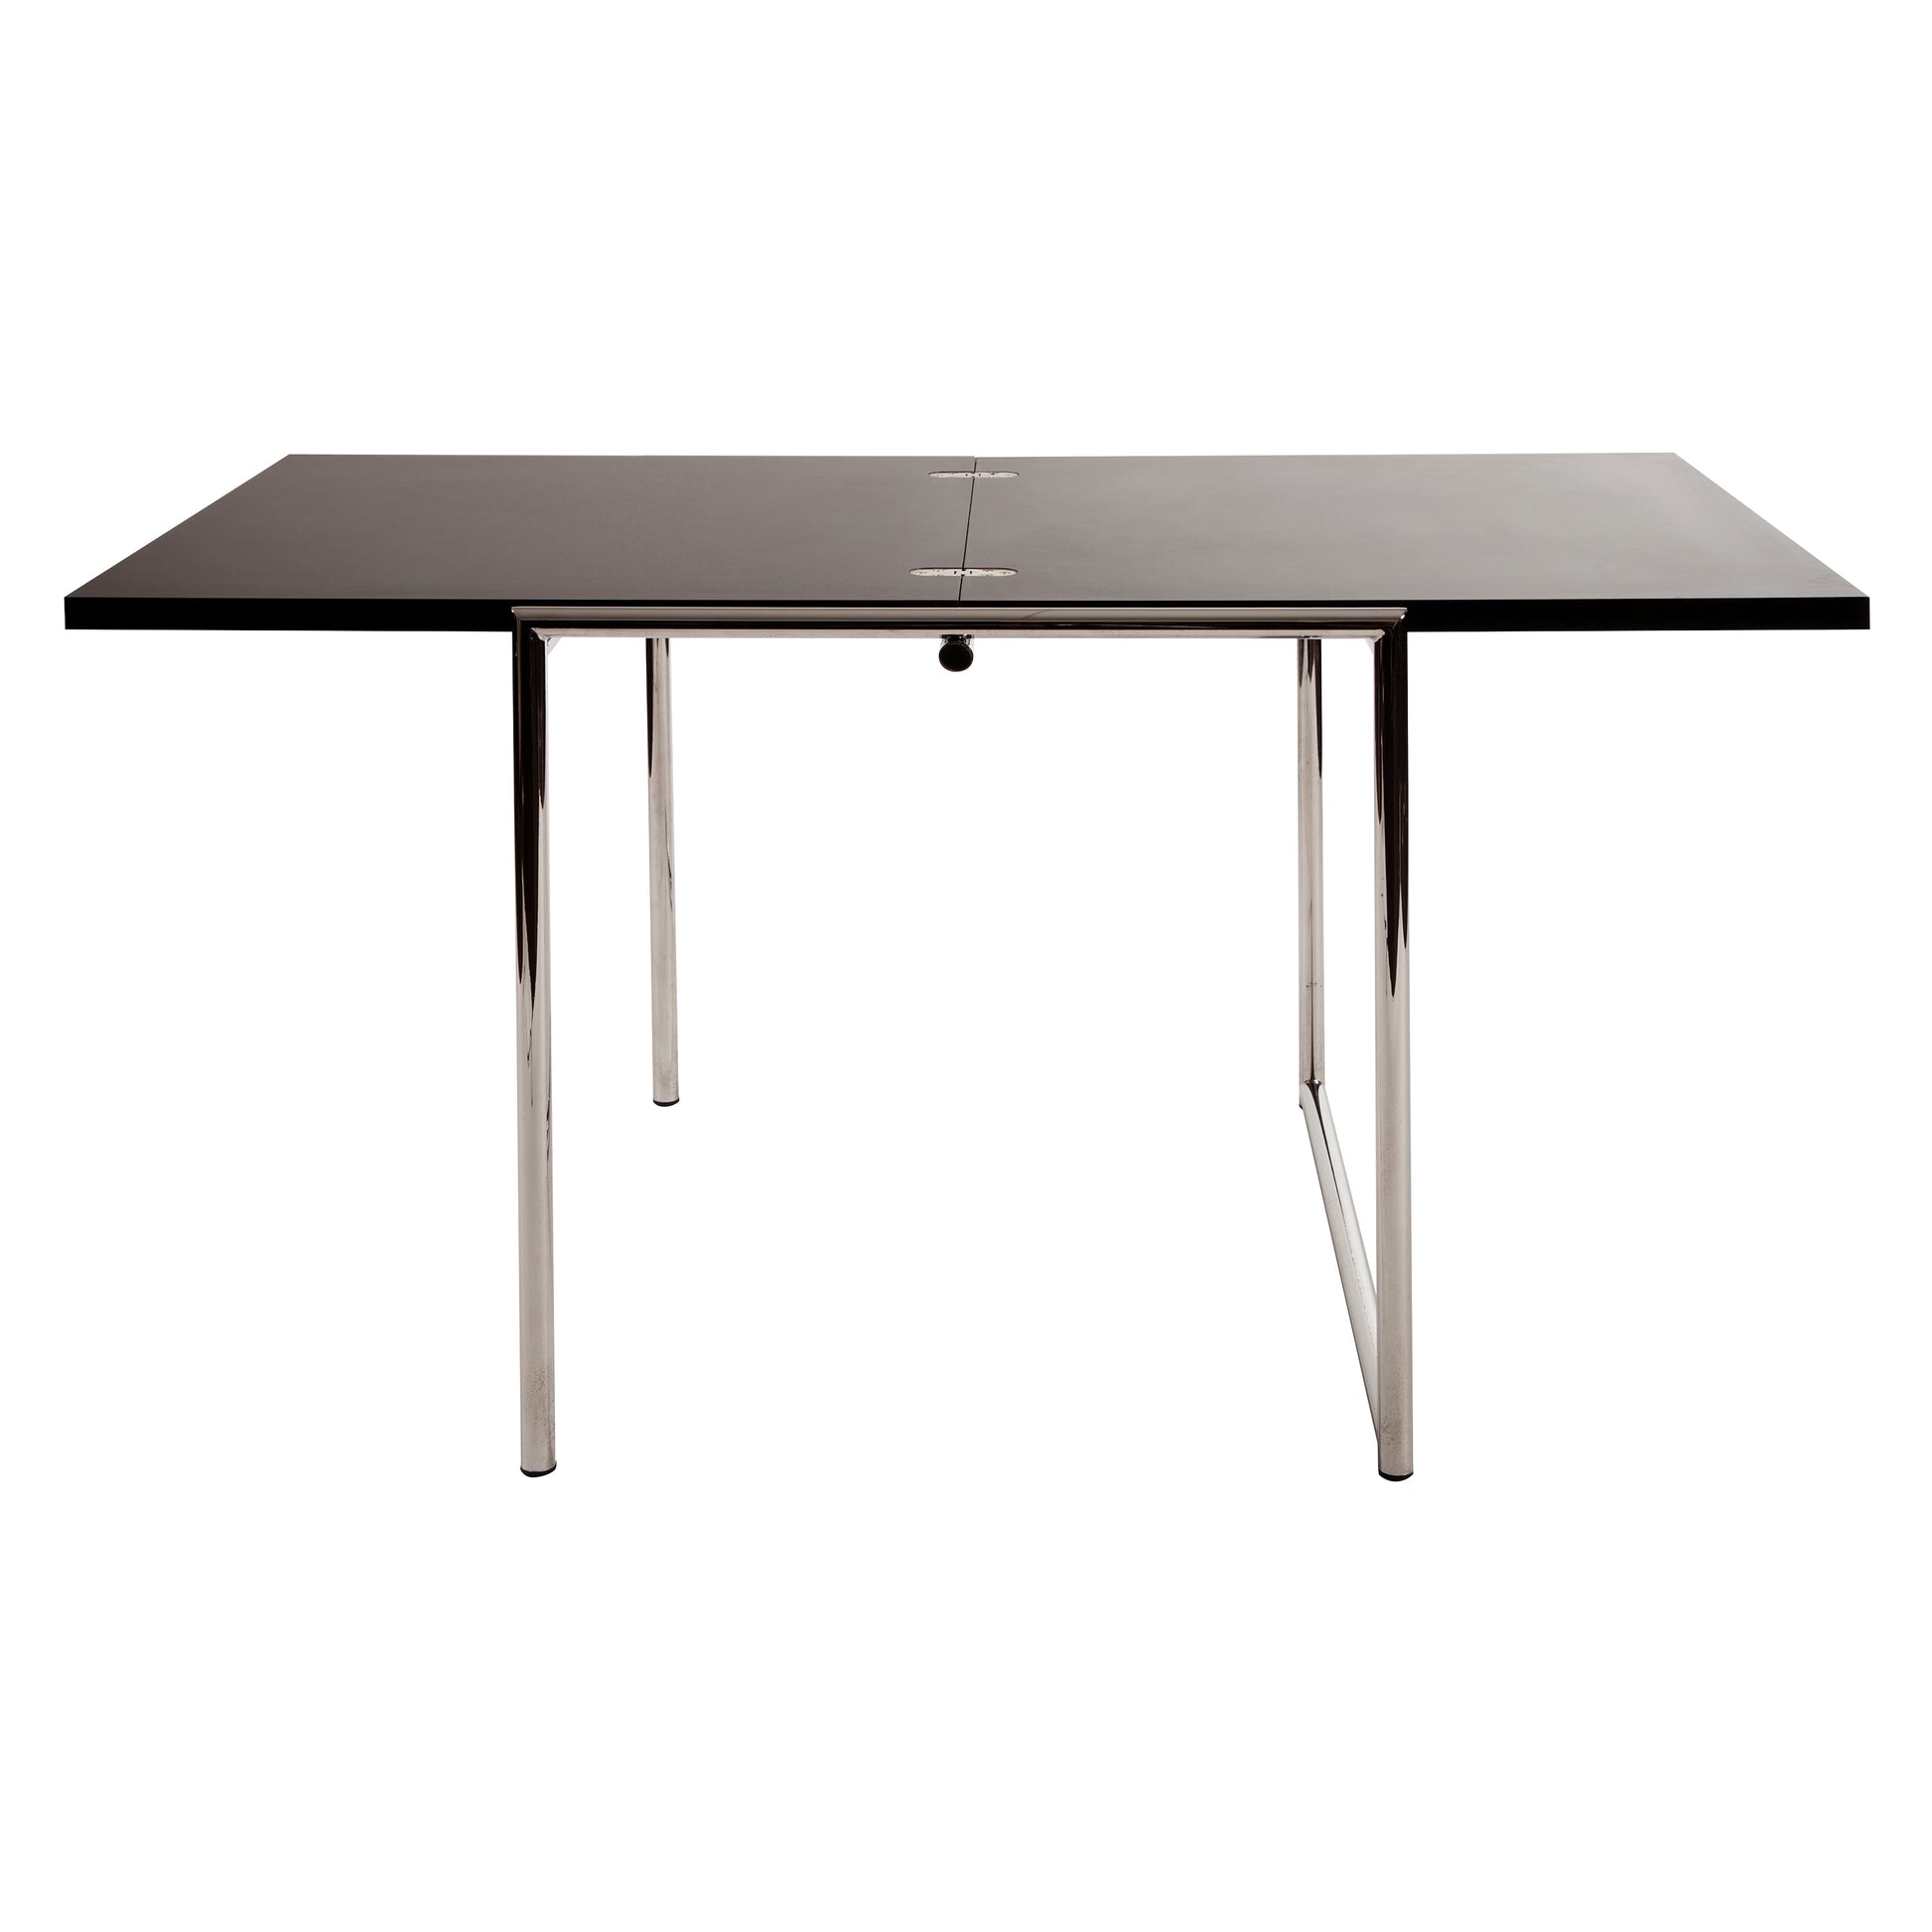 Folding table style | Black | Front open